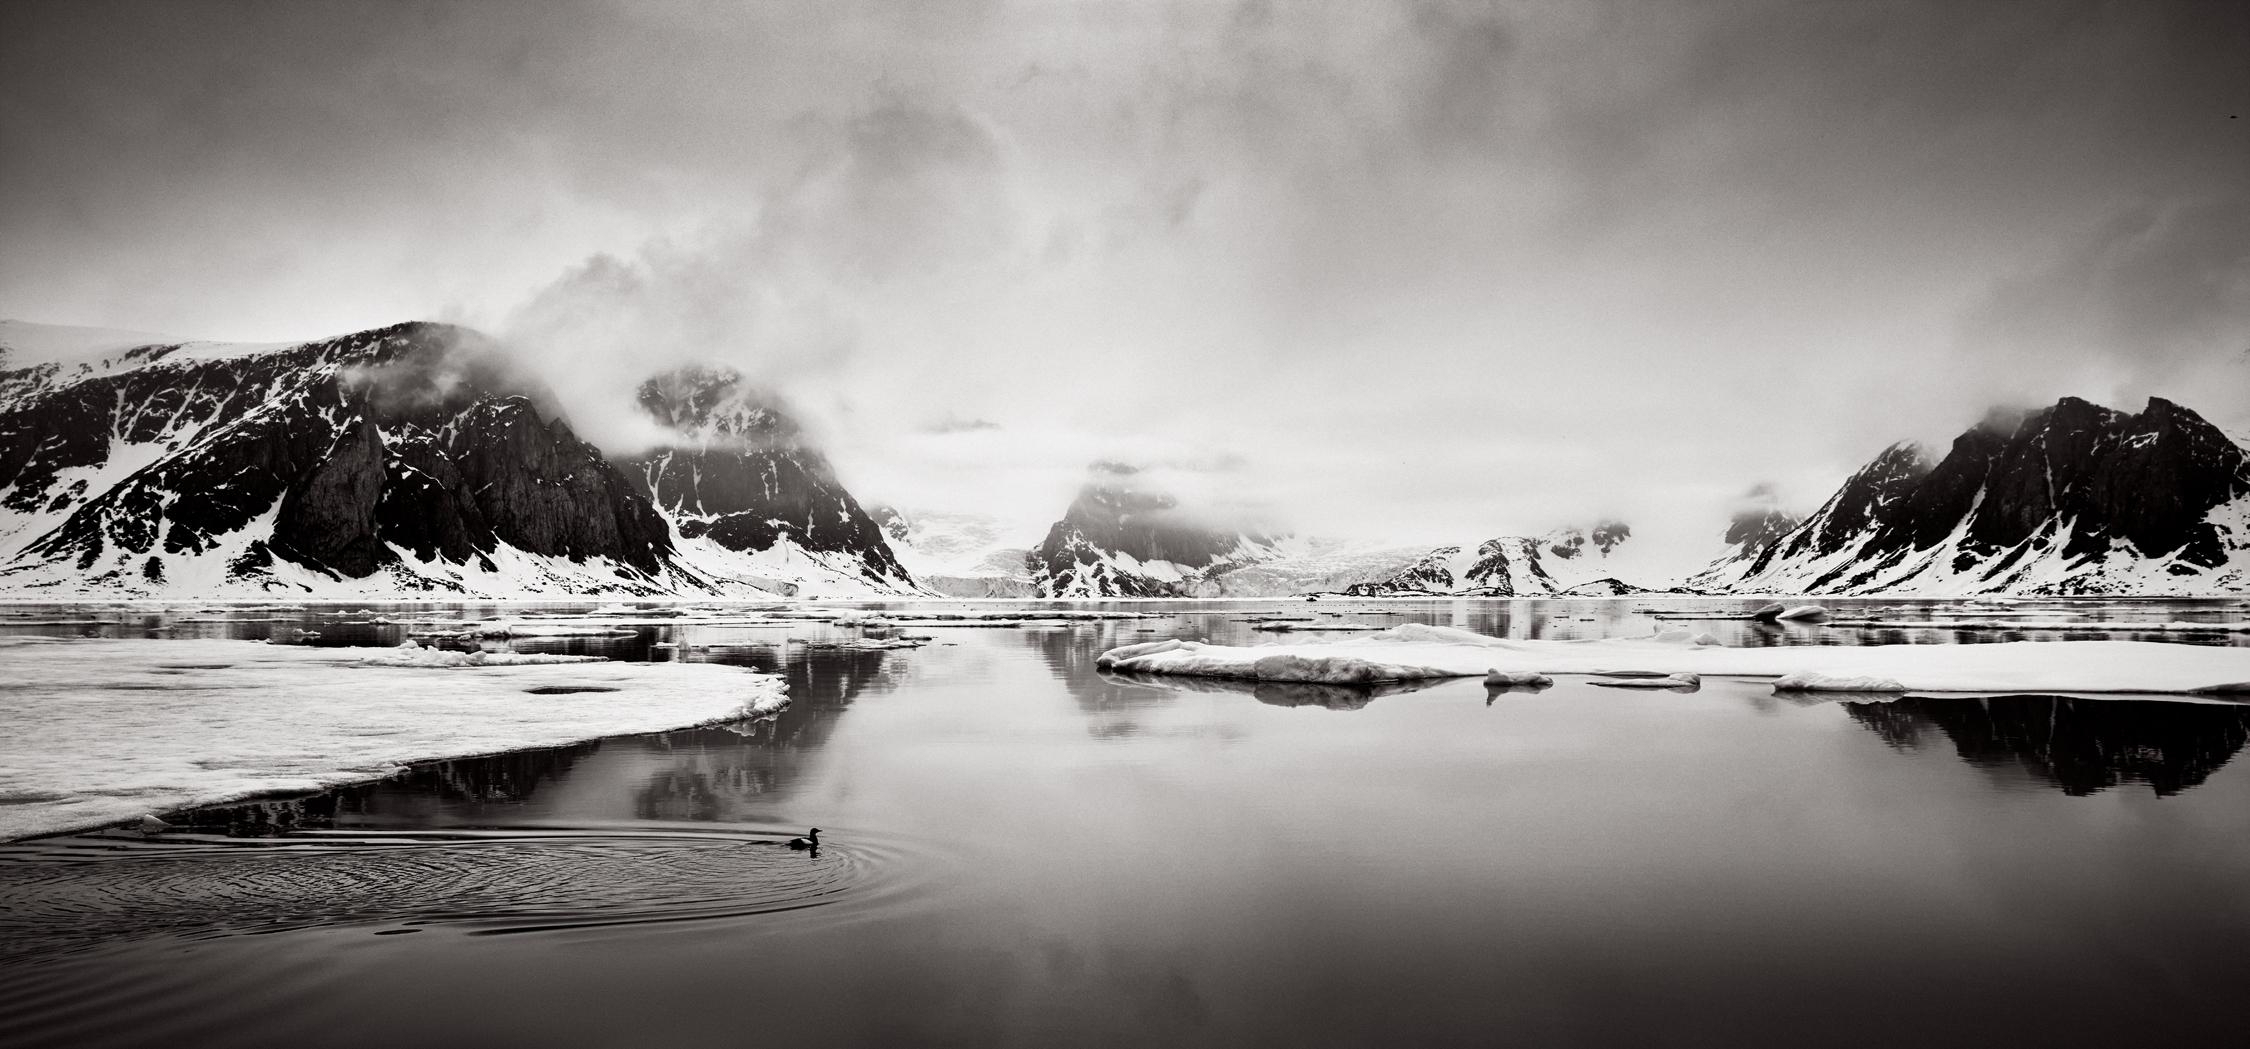 Drew Doggett Black and White Photograph - Arctic Landscape with Bird Swimming, Black & White Photography